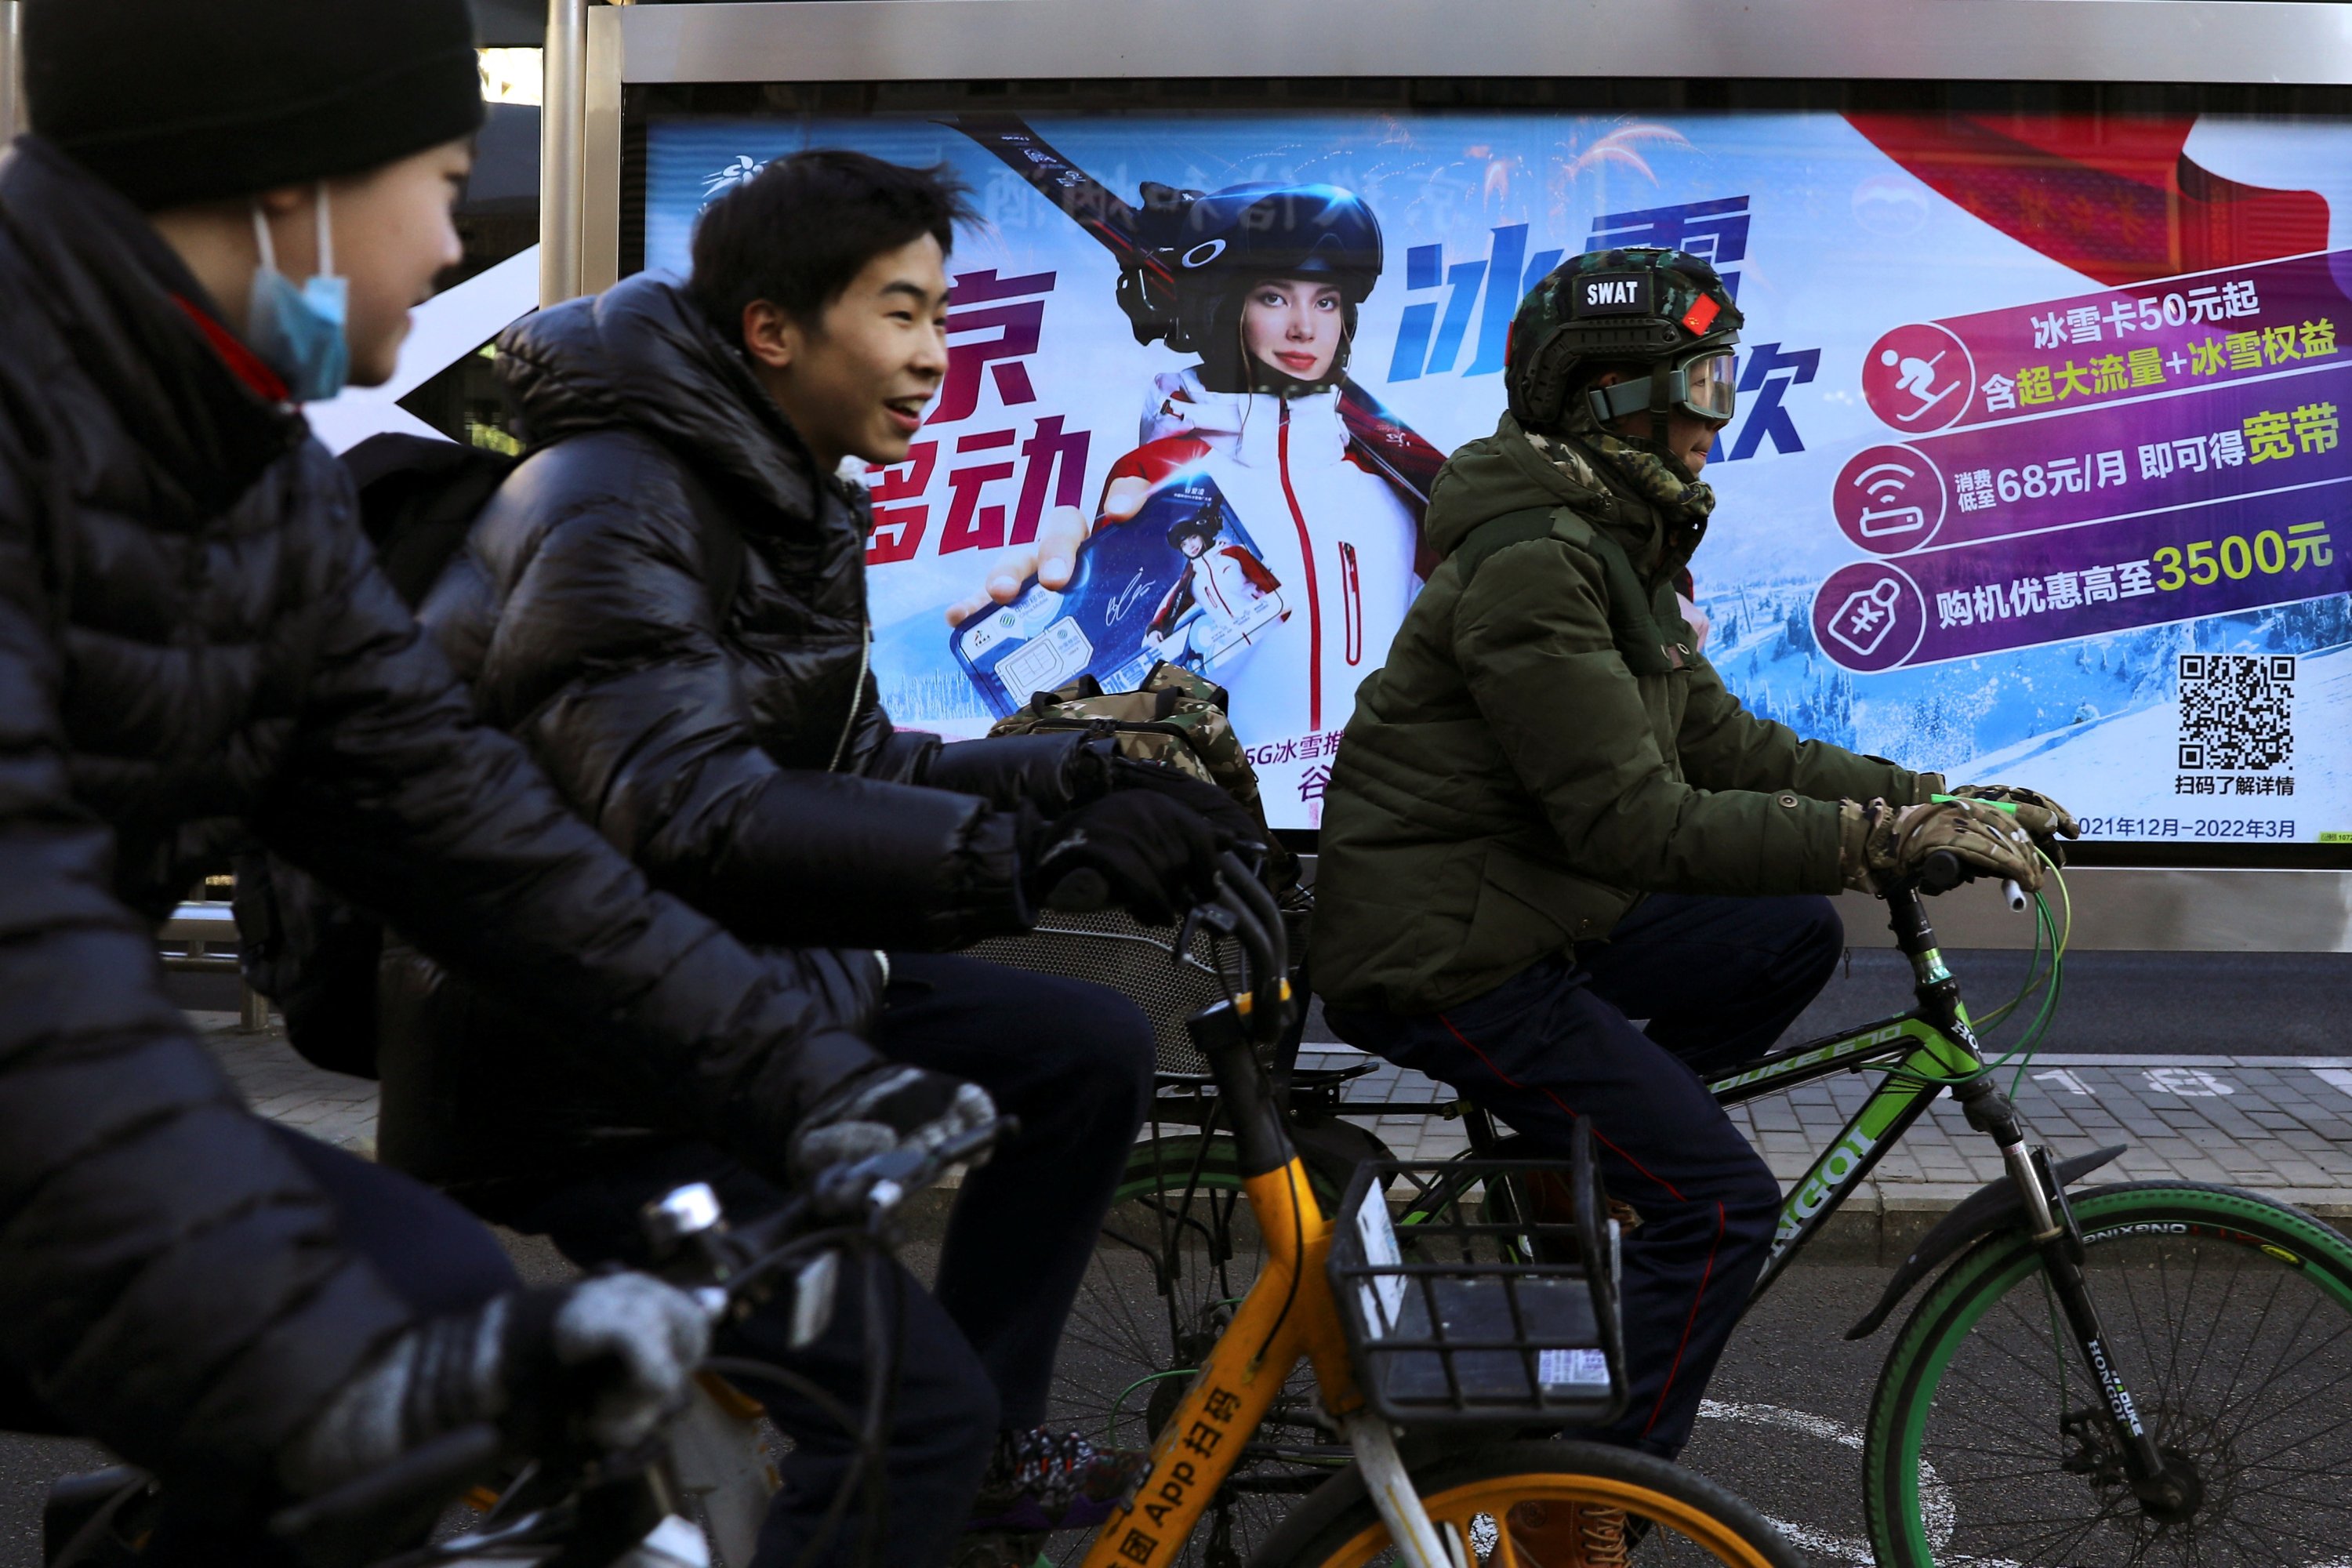 People ride bicycles past an advertisement with an image of Chinese freestyle skier Eileen Gu, Beijing, China, Jan. 11, 2022. (Reuters Photo)